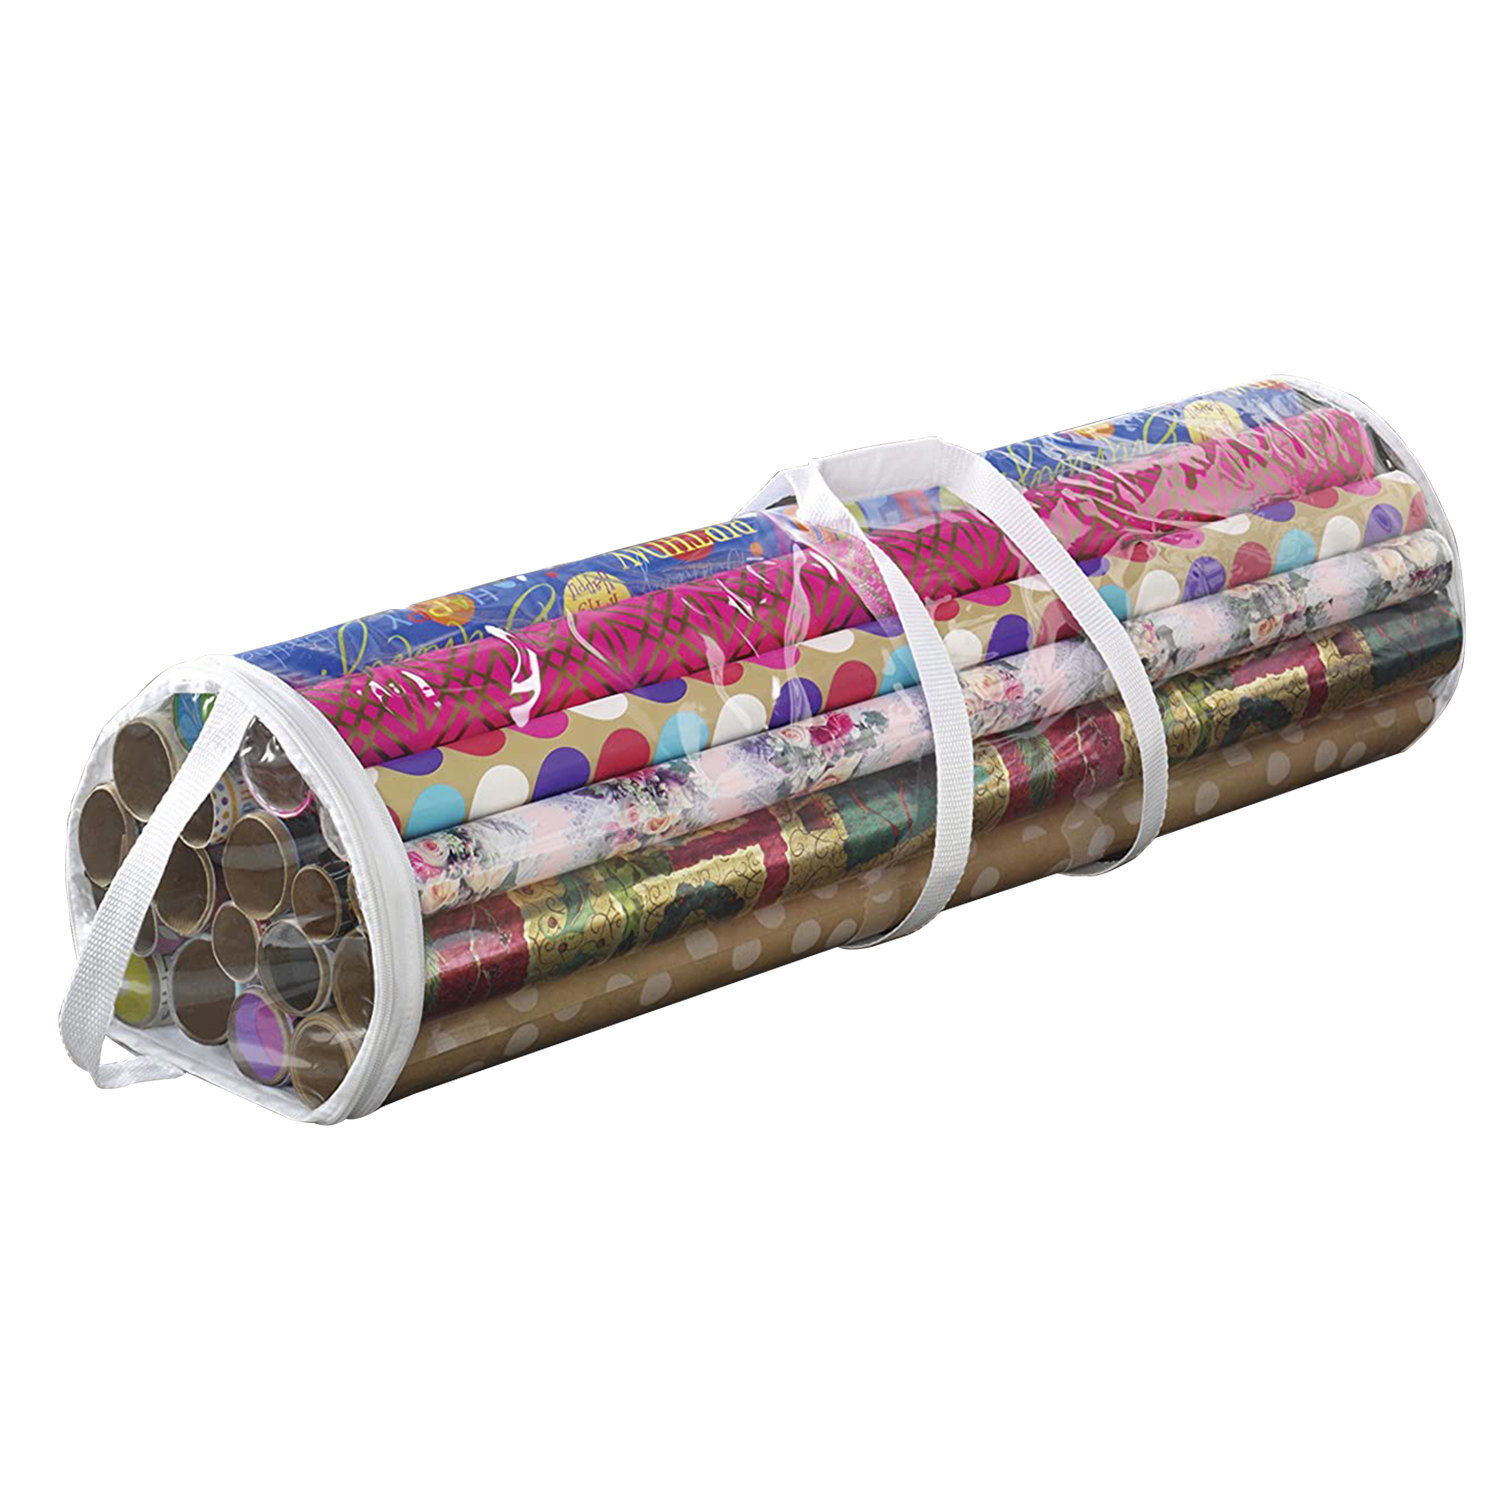 Jam Paper Industrial Bulk Wrapping Paper, 1/Pack, Glitter Birthday Gift Wrap, 520 Sq ft (1/4 Ream), Size: 2496 x 30